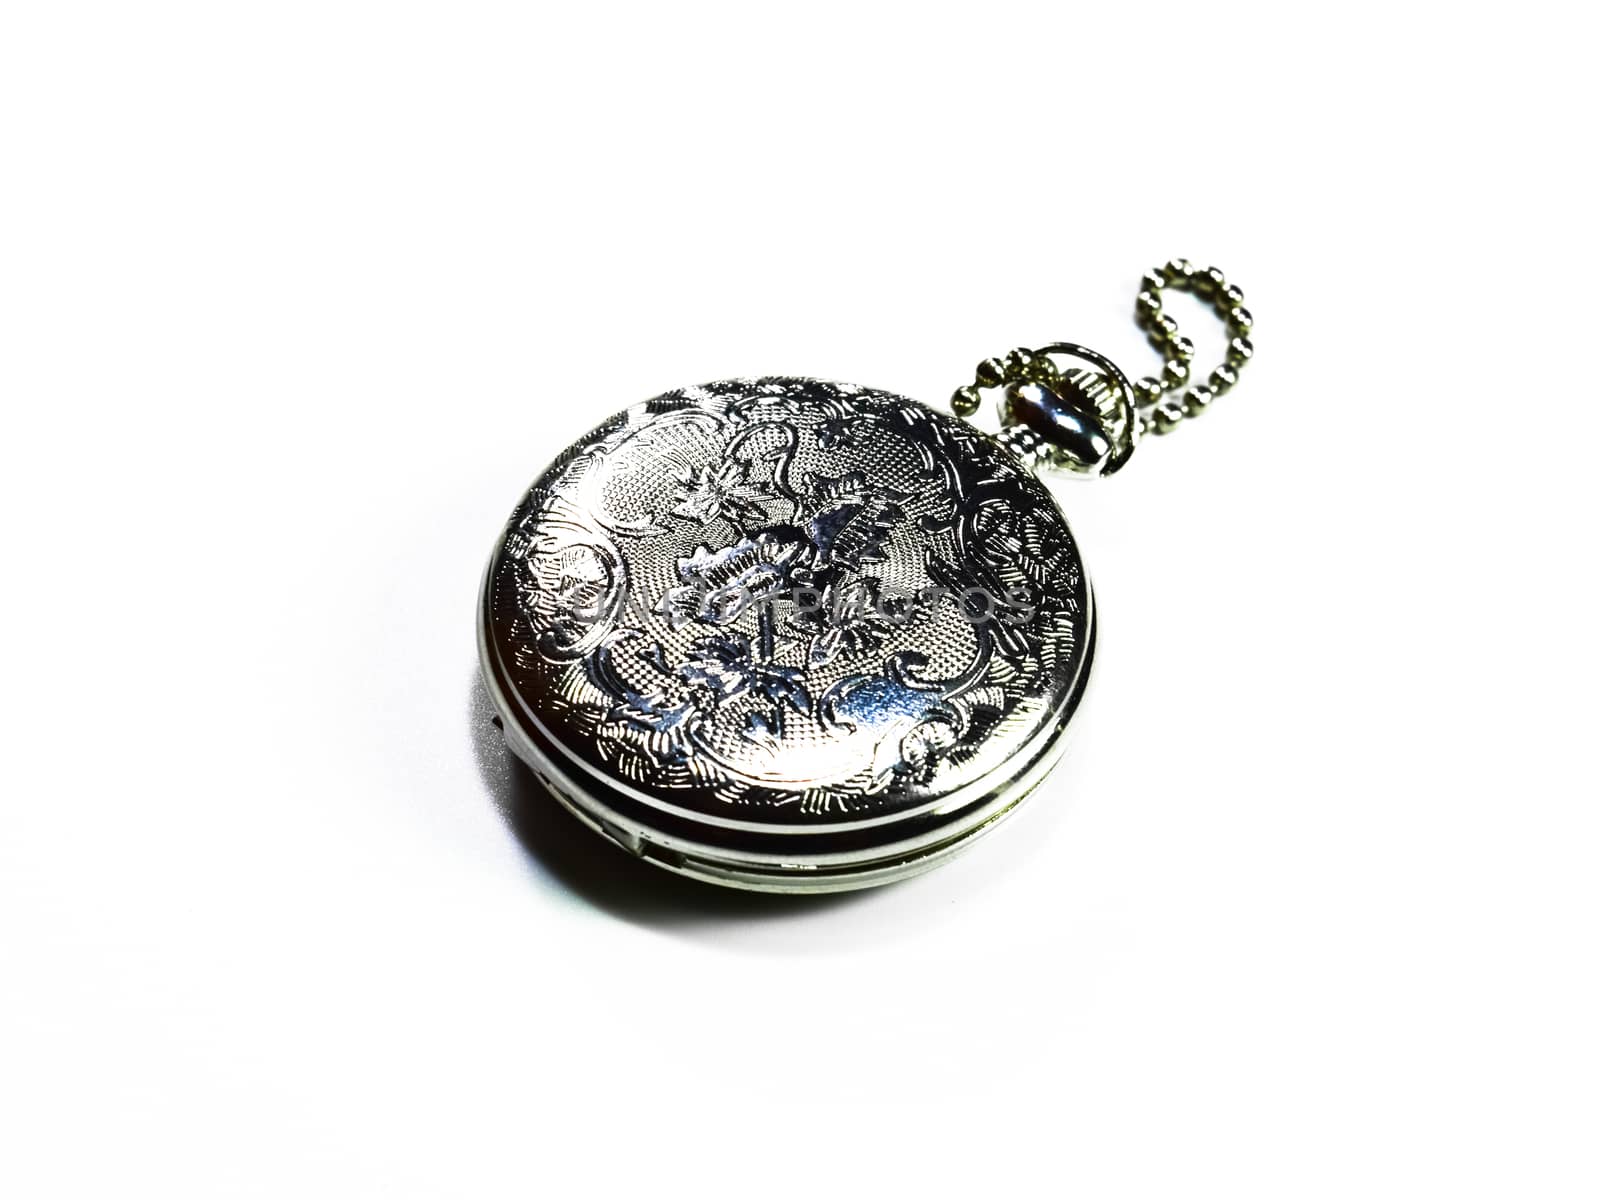 Steel pocket watch, shiny, stainless steel. by fedoseevaolga